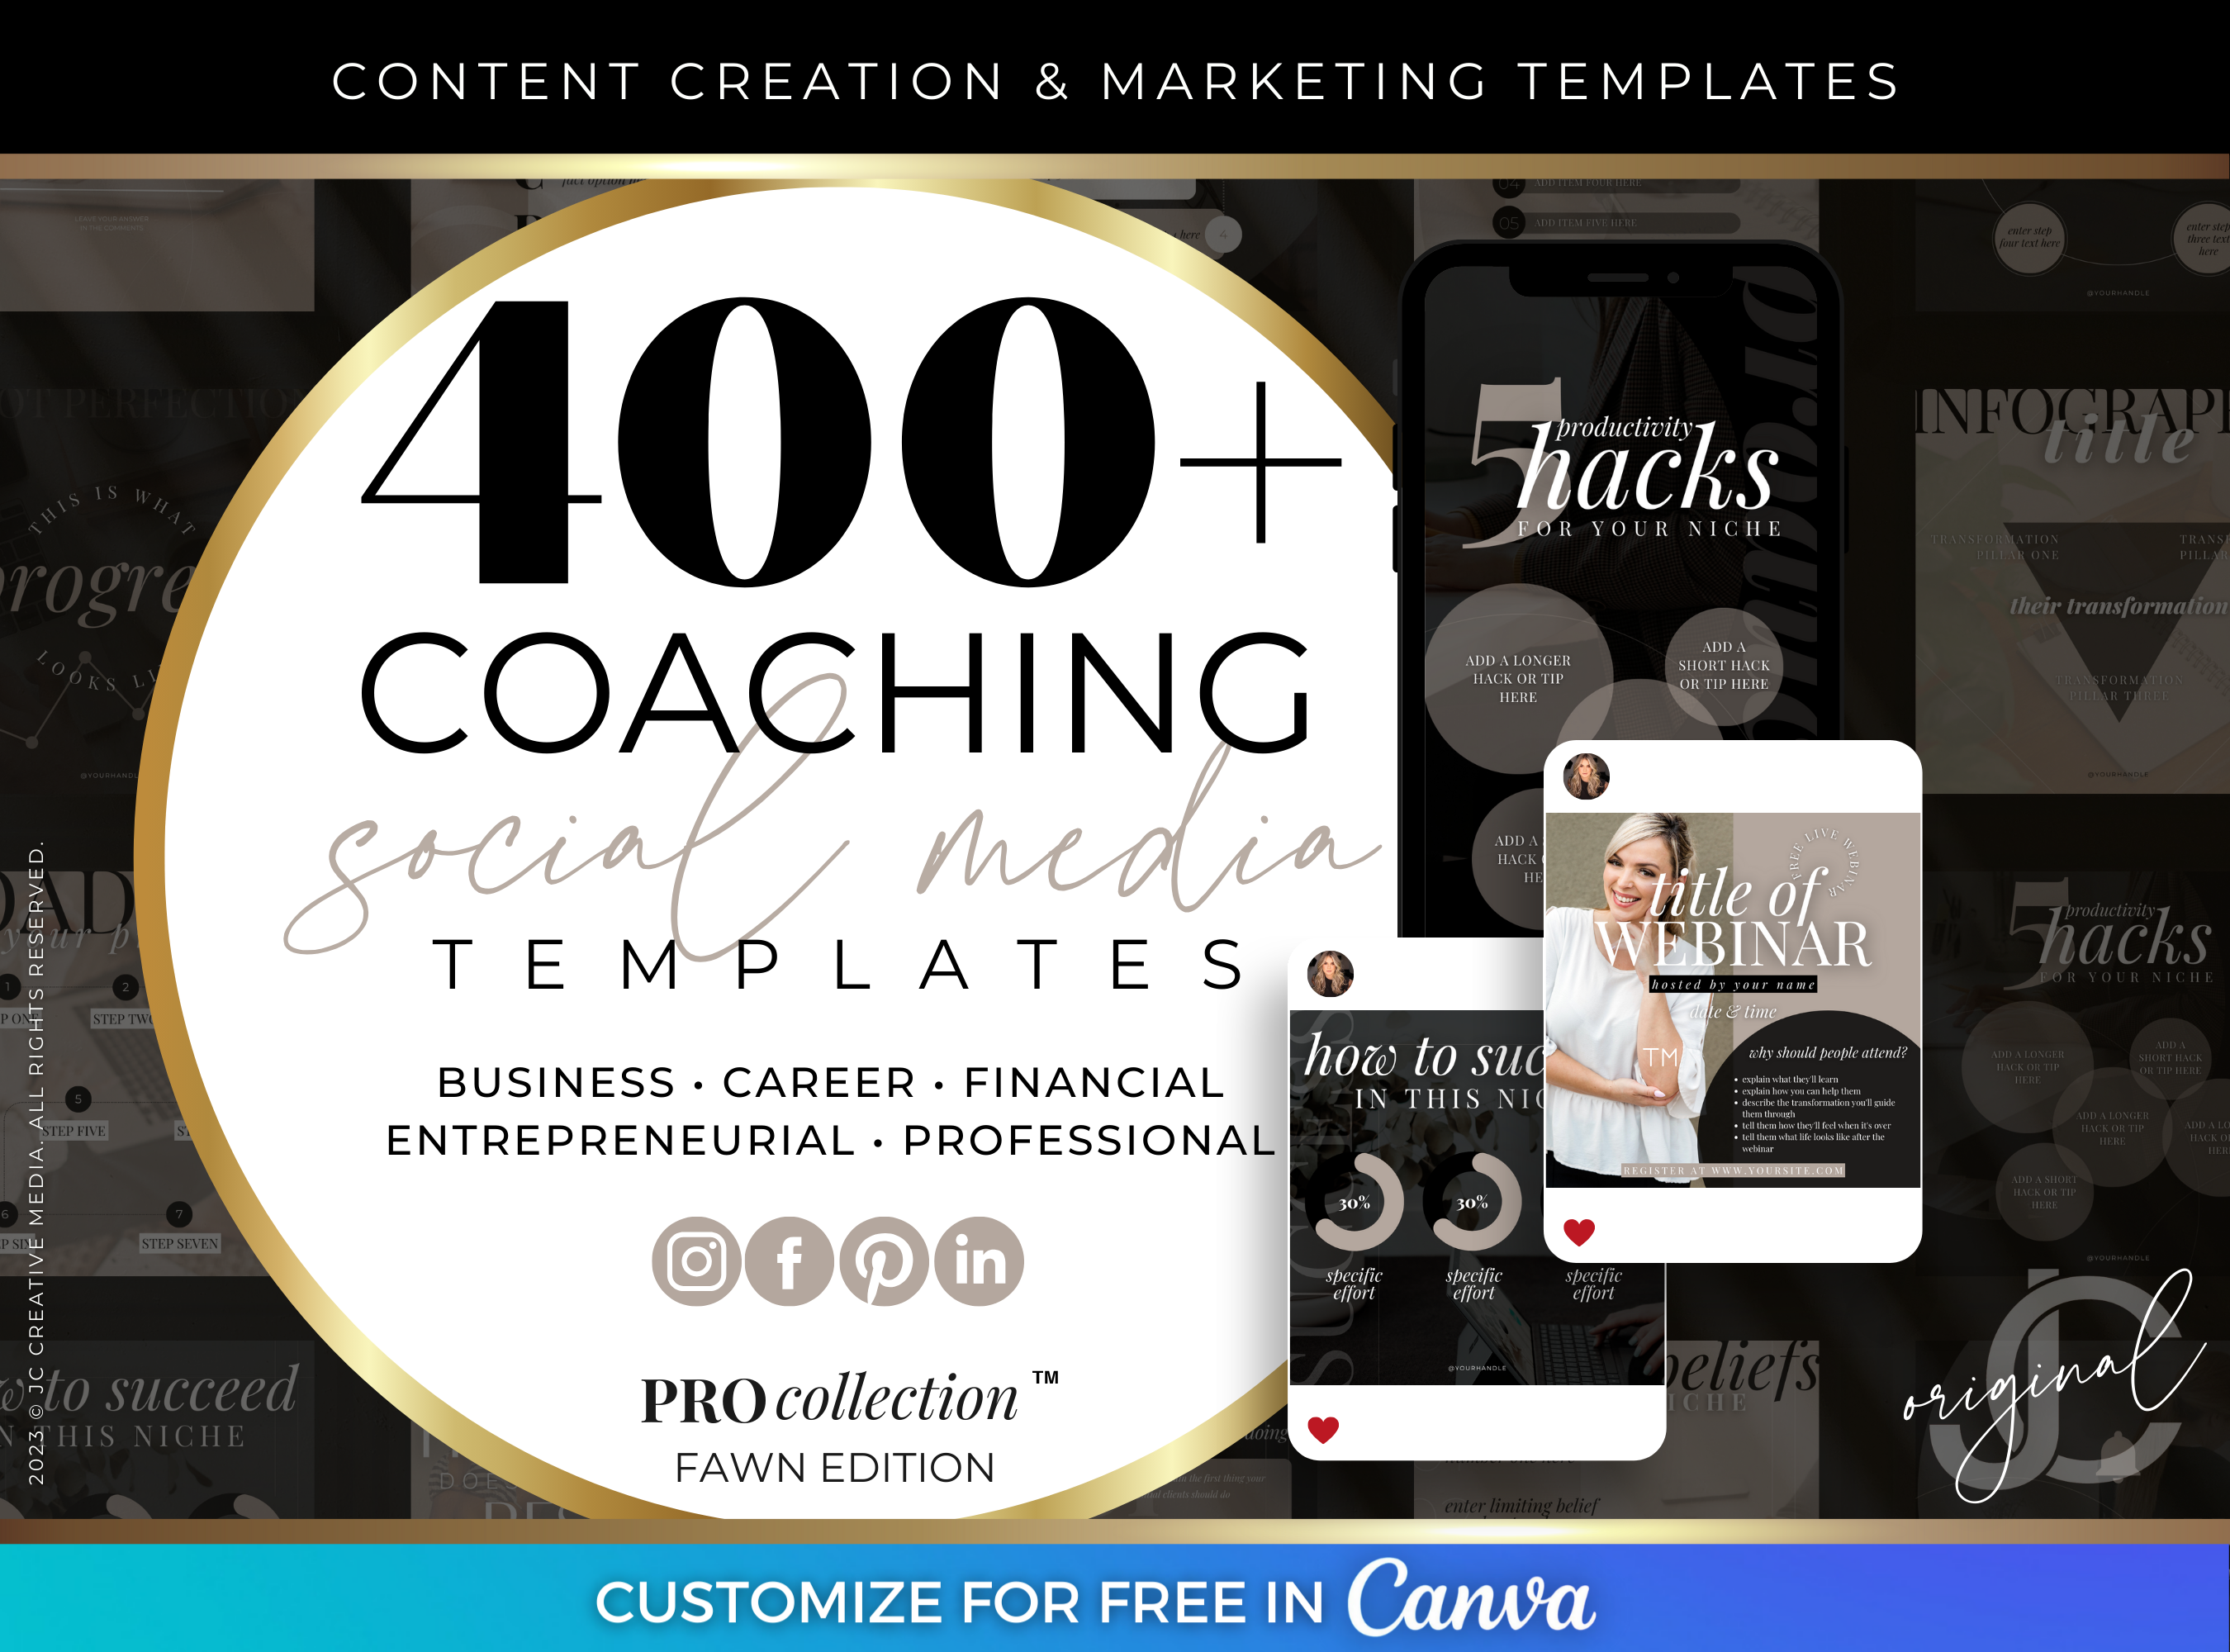 Black Executive Coaching Social Media Templates for Professionals (Content Creation and Marketing Canva Templates)